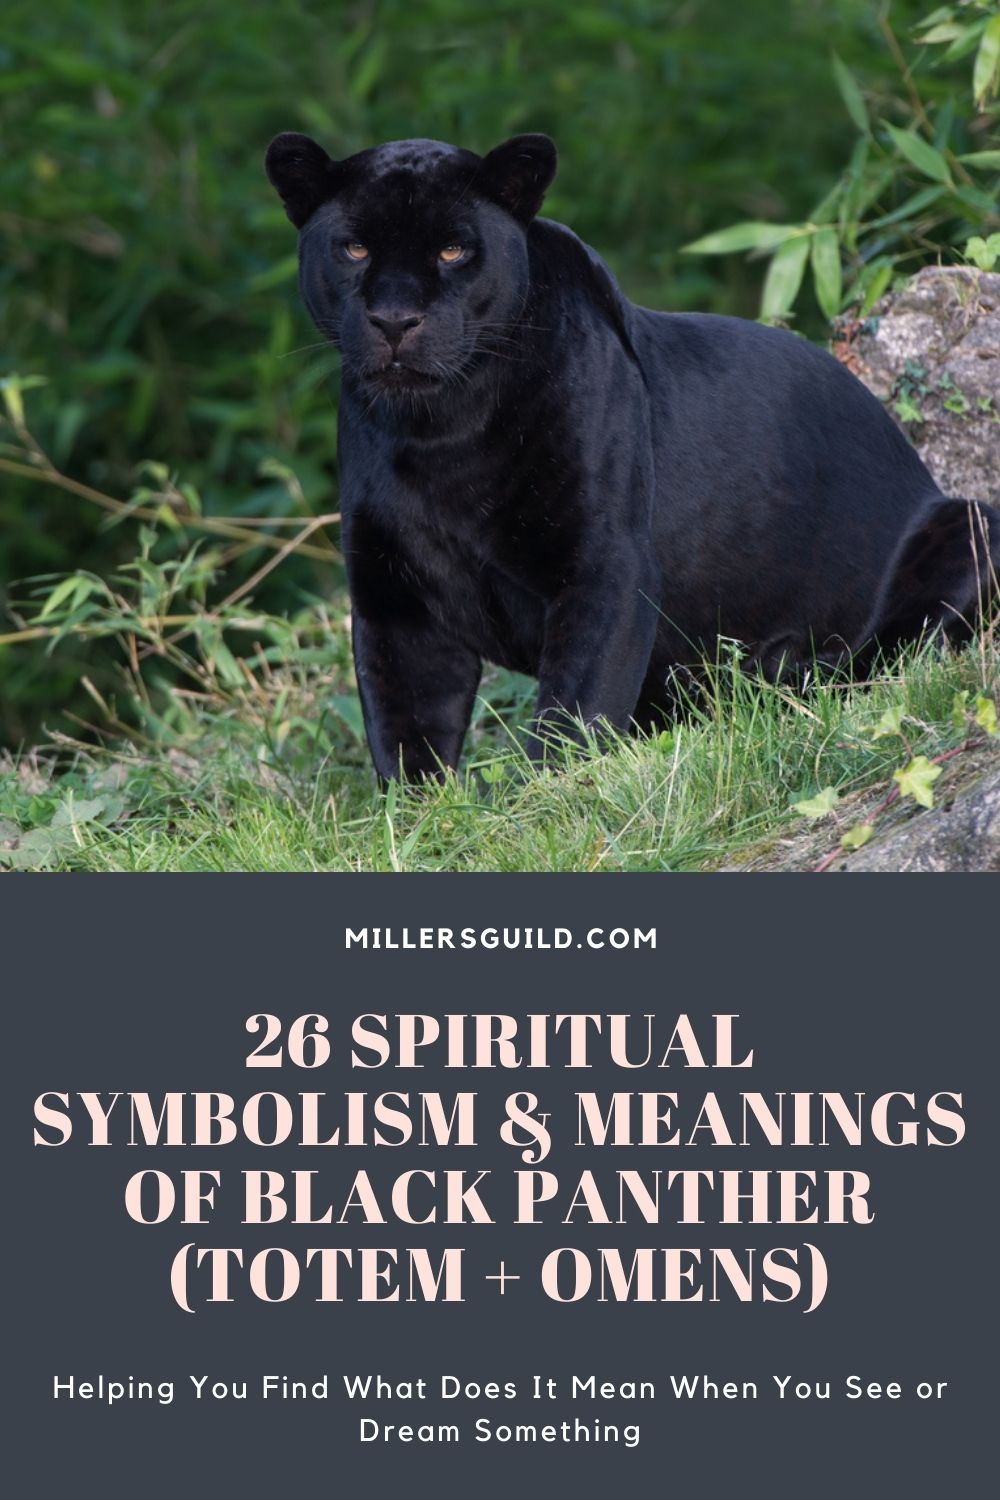 26 Spiritual Symbolism & Meanings of Black Panther (Totem + Omens)